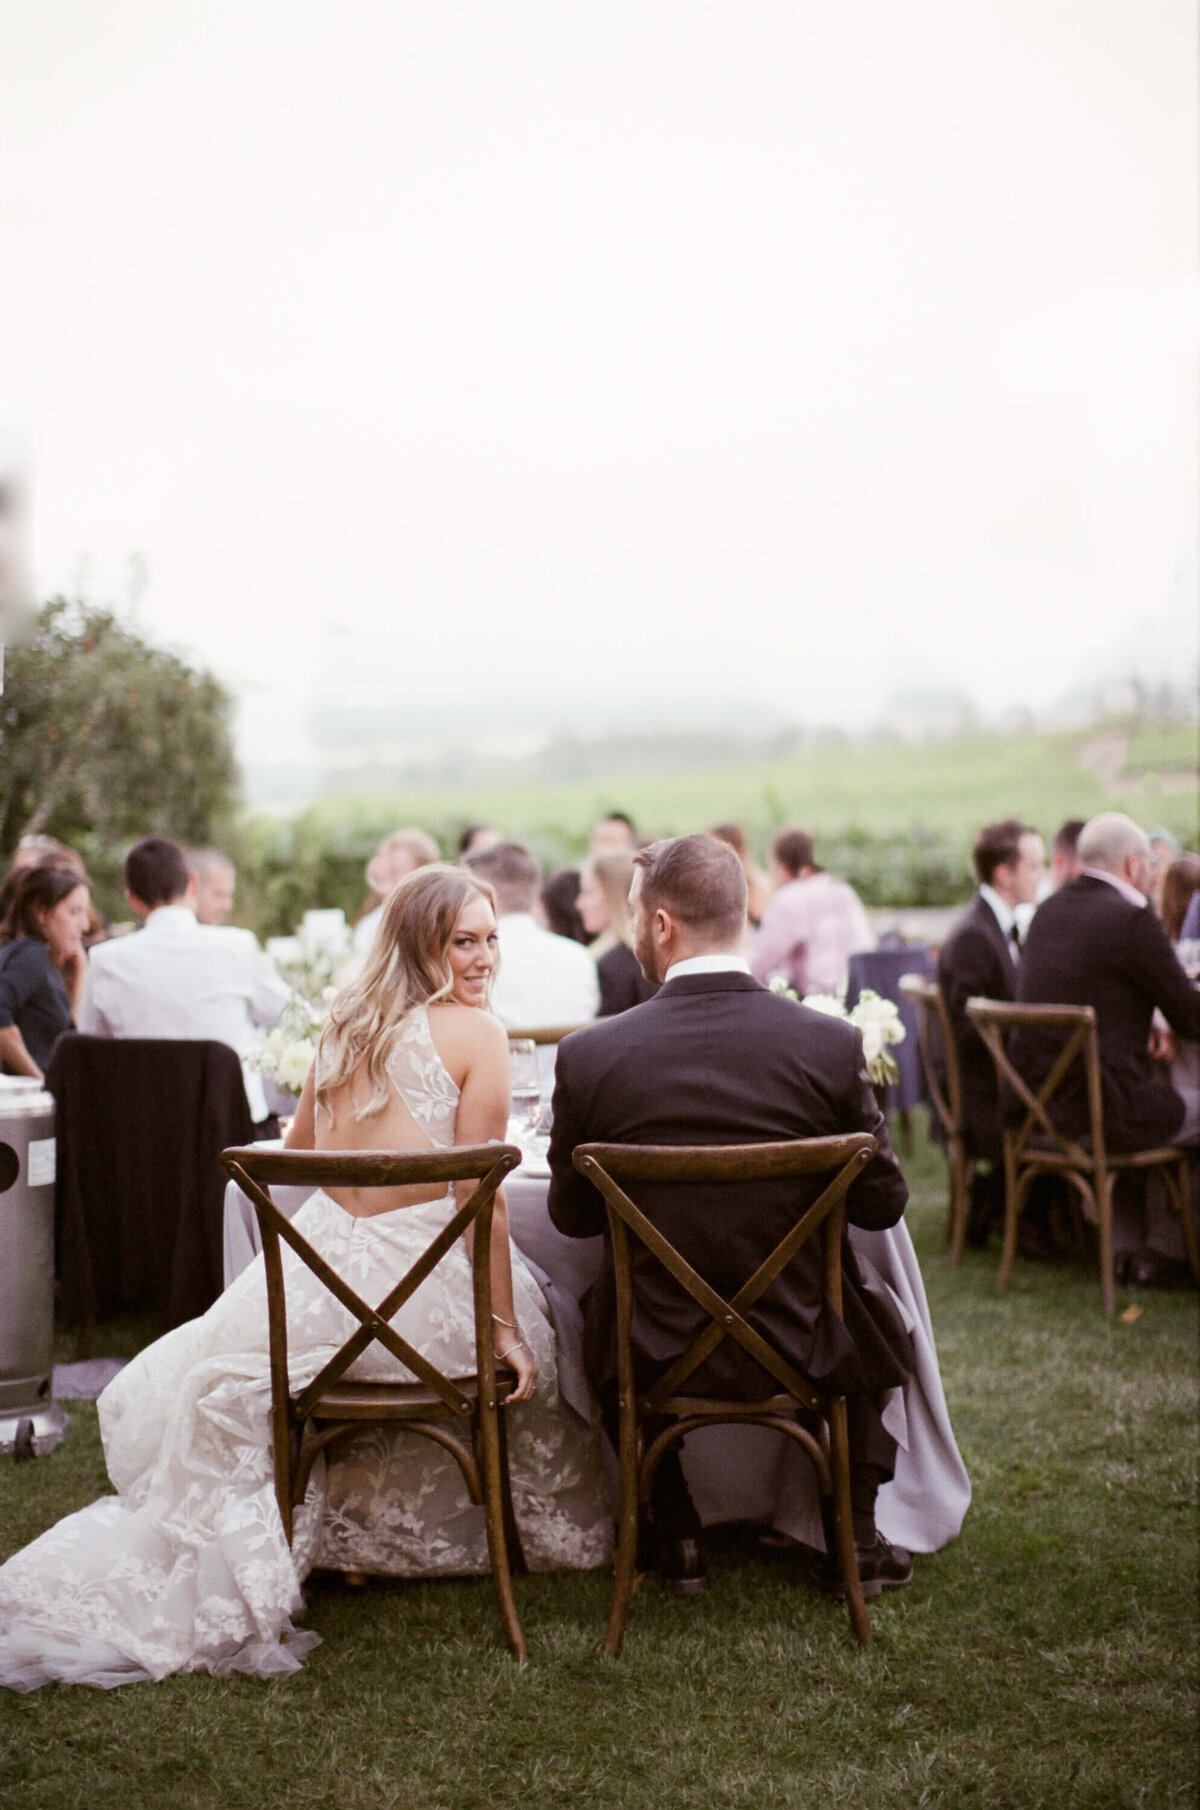 Wine Country Destination Wedding Photographer Robin Jolin photographs a wedding reception party with the groom in a suit and bride wearing a semi-nude wedding gown.